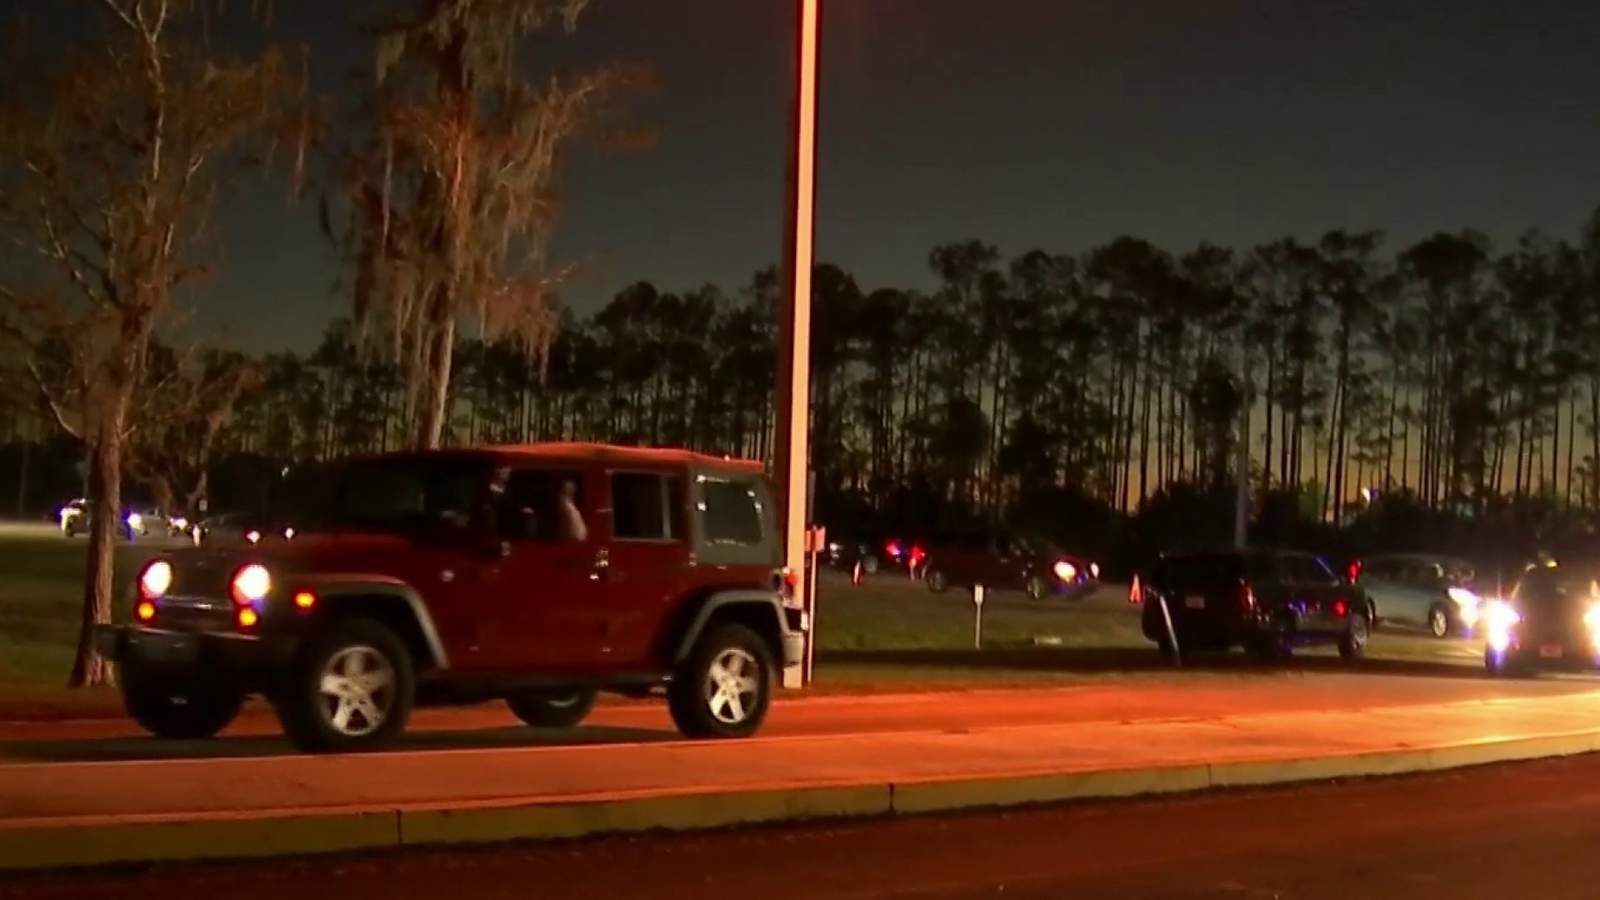 Seniors to sleep in their cars to wait for the COVID-19 vaccine event in Volusia County